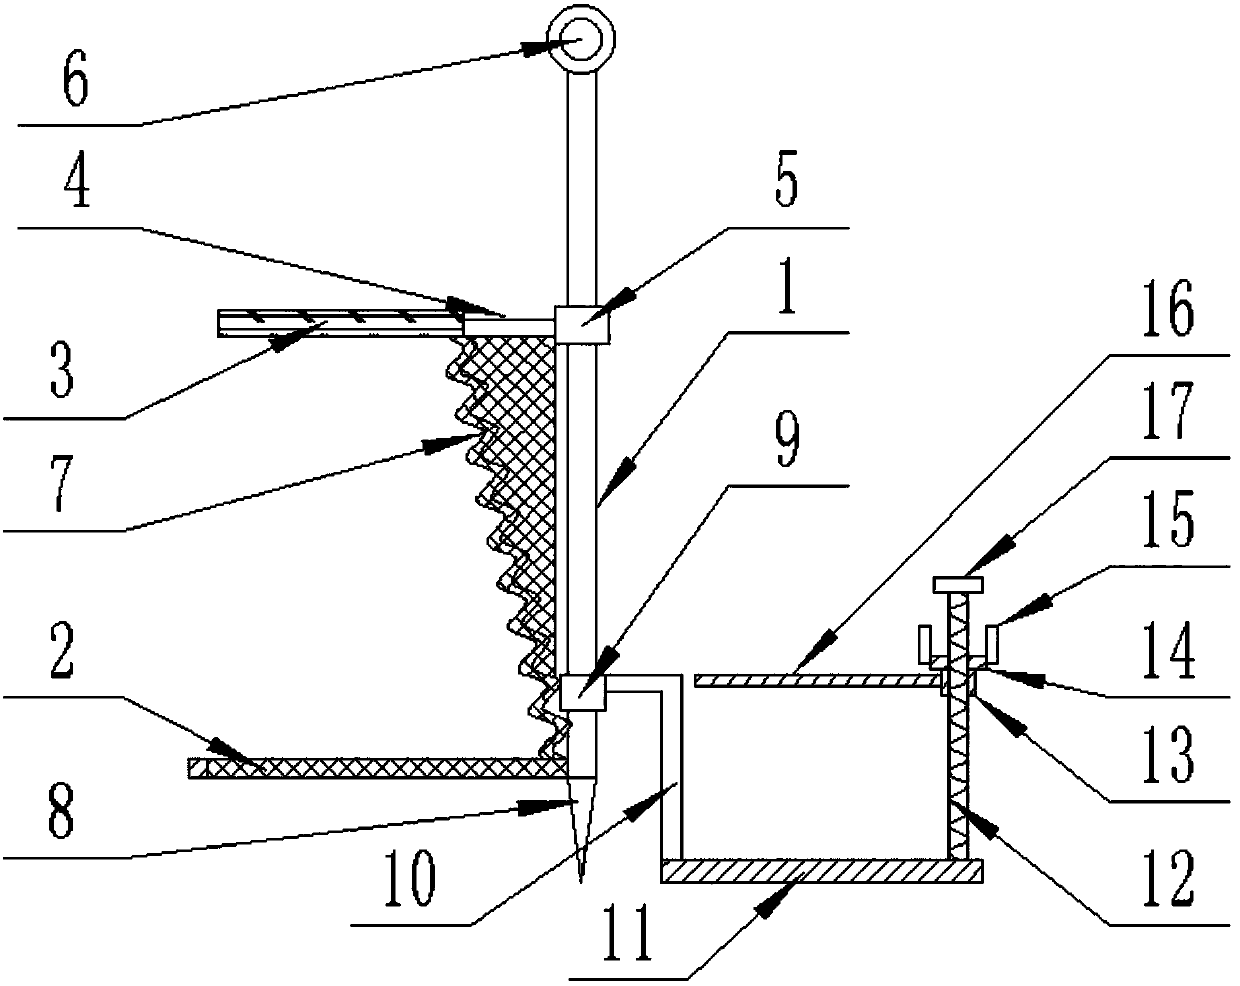 Garbage filter device for garden channels